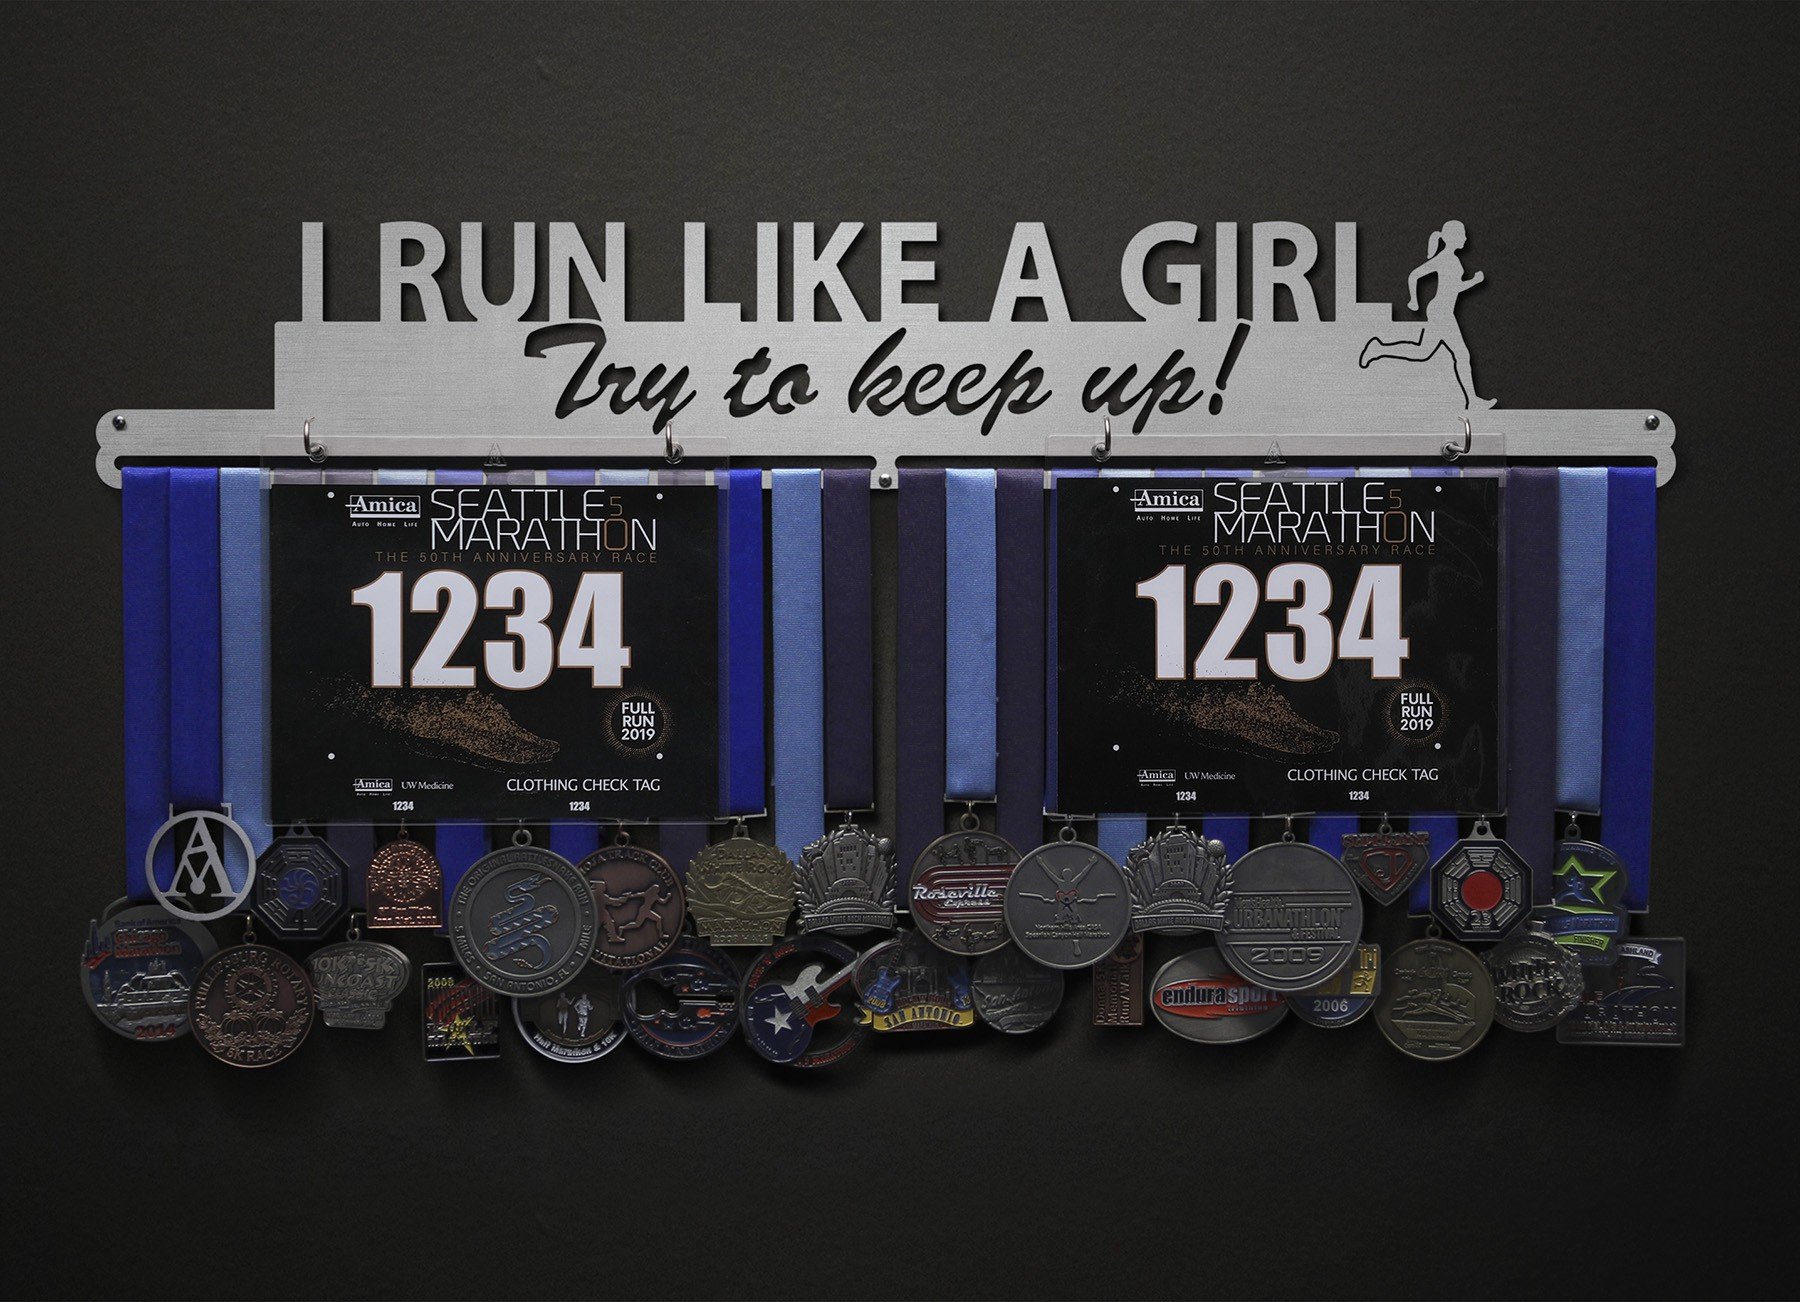 I Run Like A Girl - Try To Keep Up! Bib and Medal Display